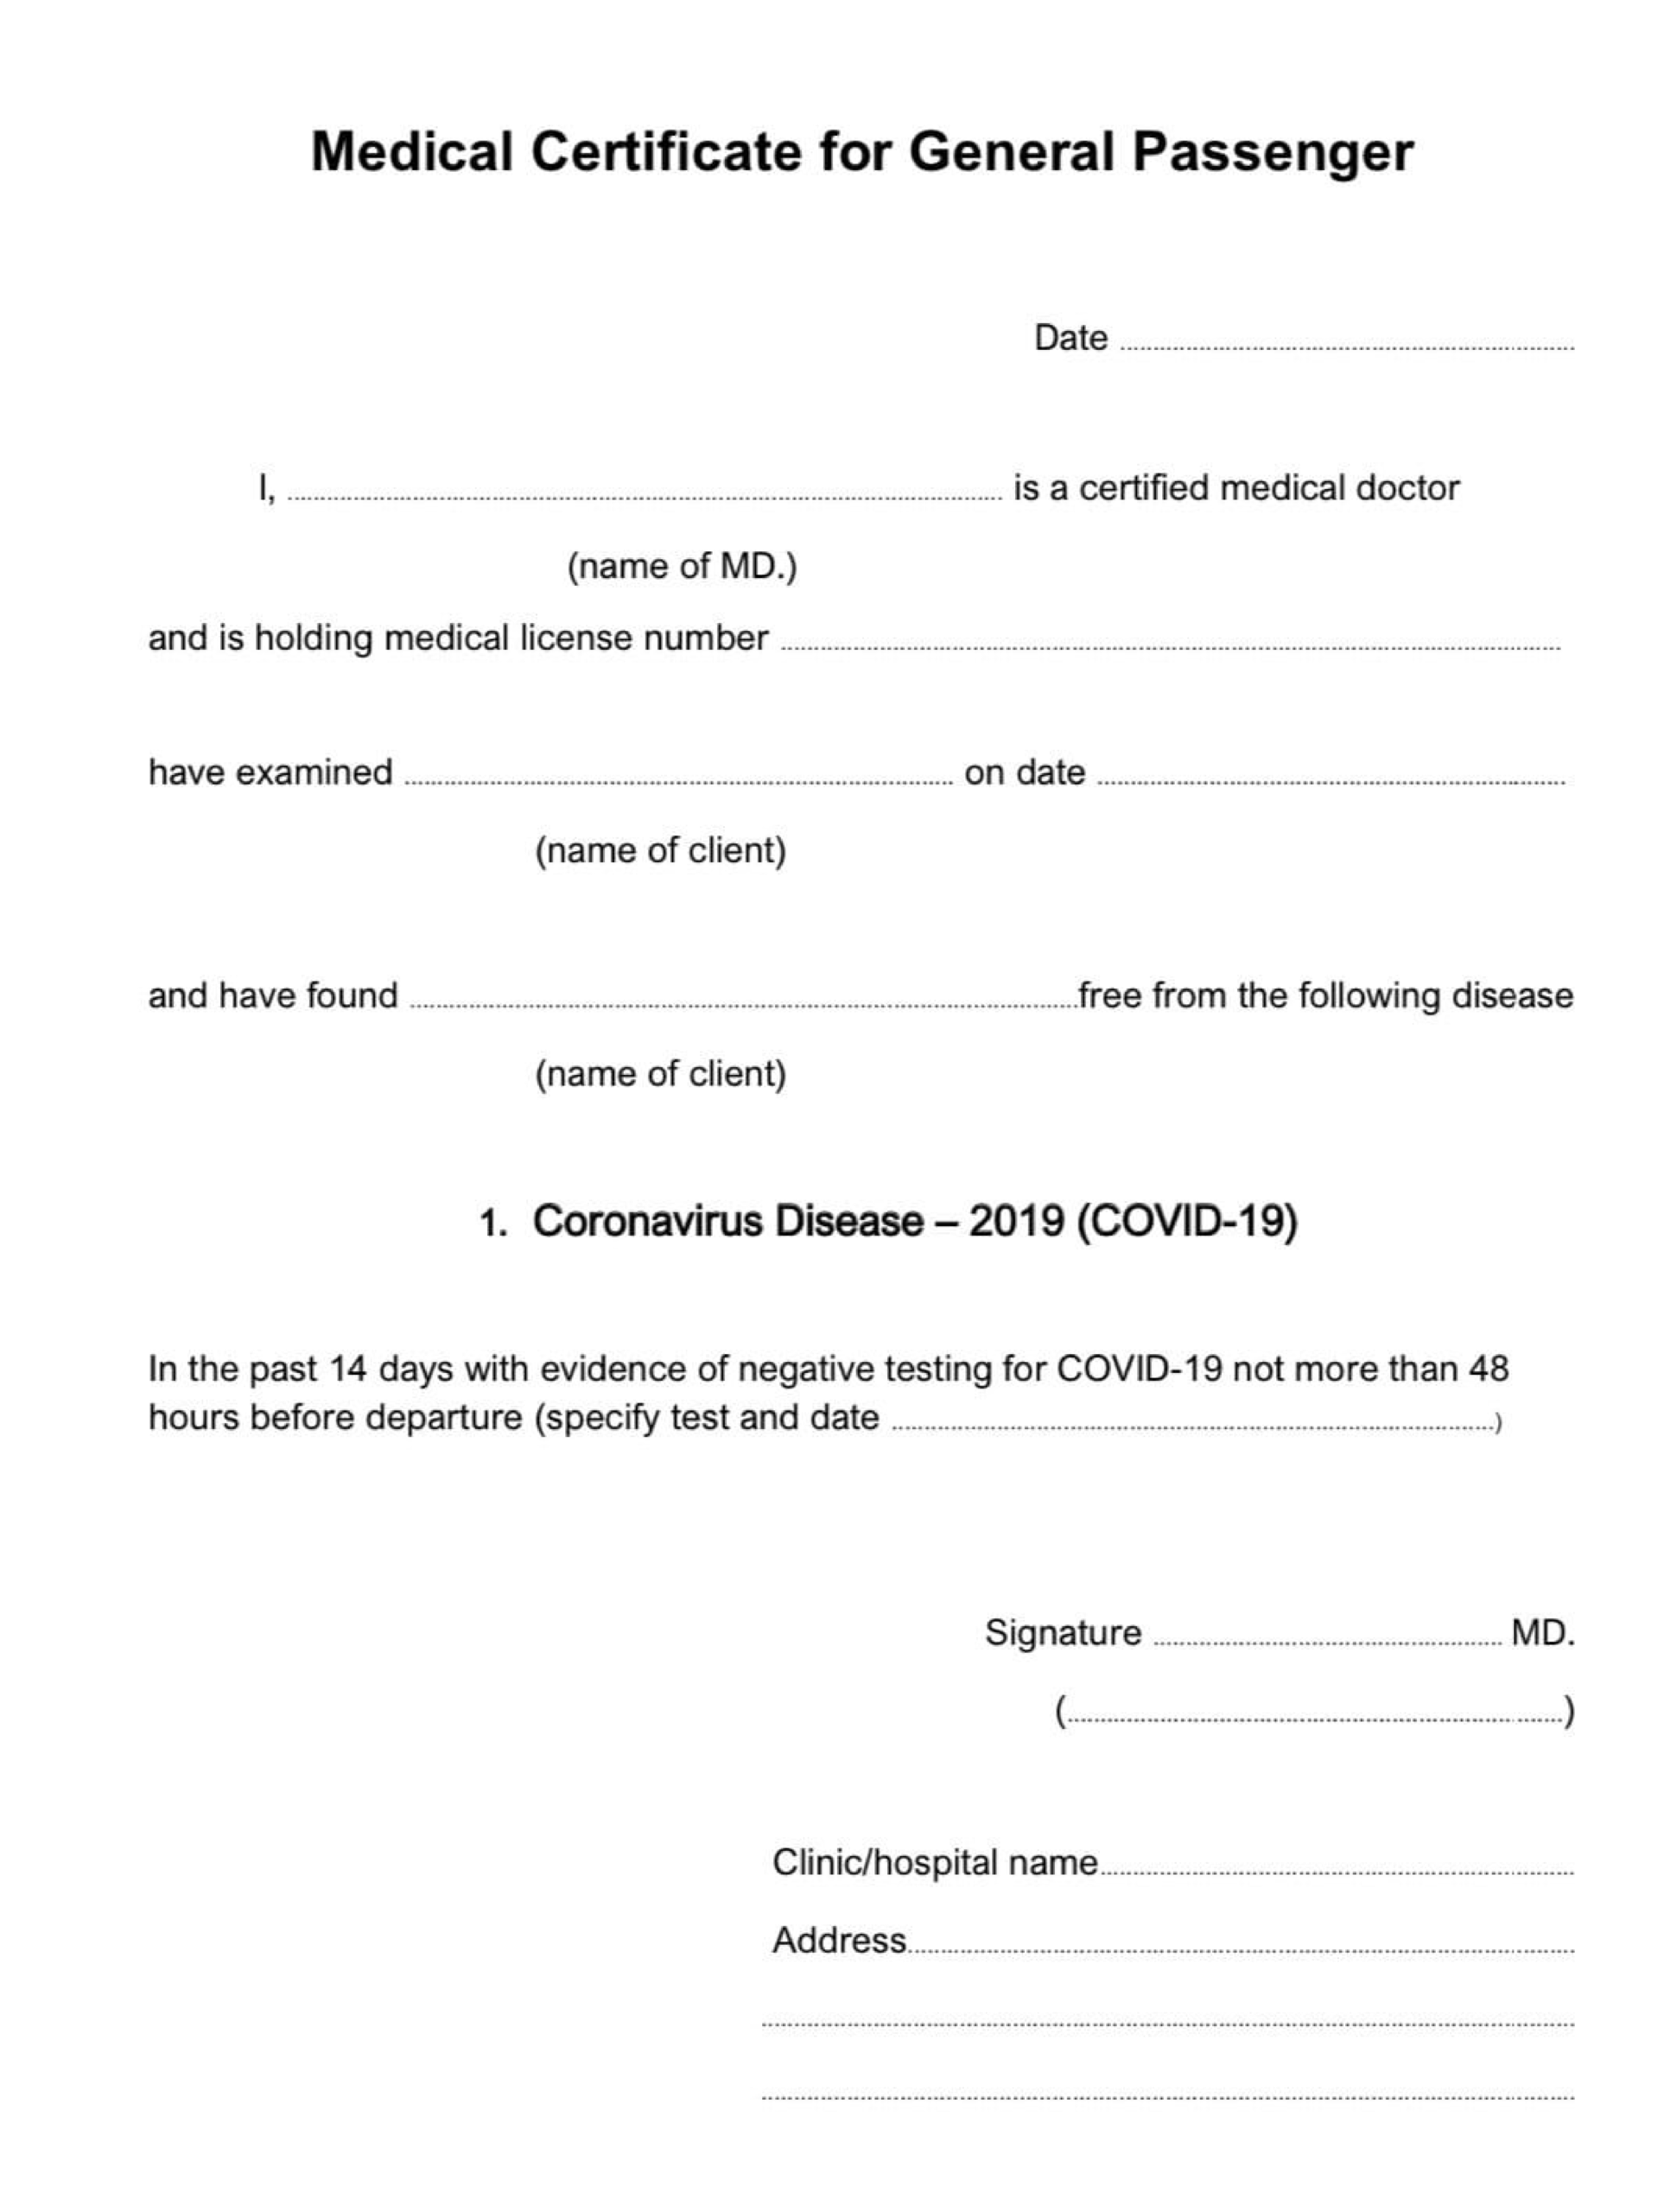 Covid19 Medical Certificate Fit To Fly | Templates At Throughout Fake Medical Certificate Template Download